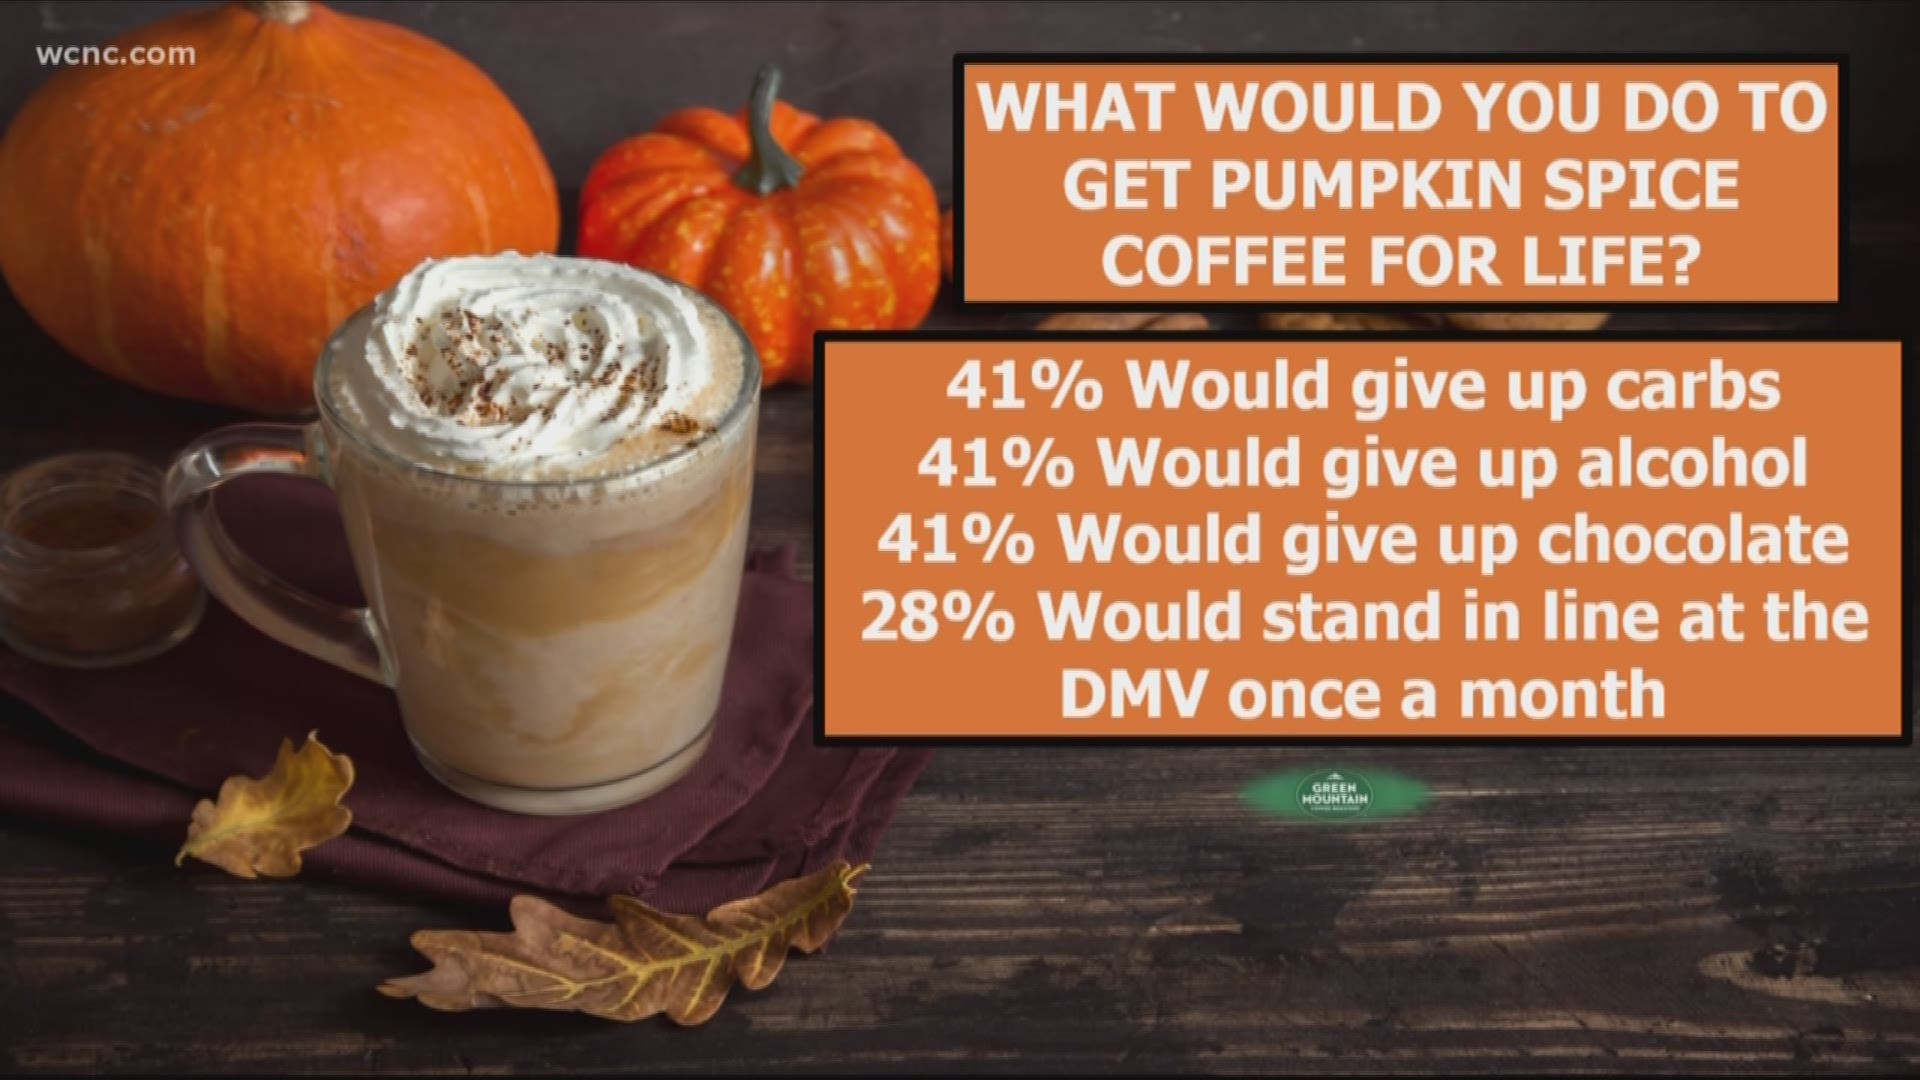 According to a new poll from Keurig makers Green Mountain Coffee, 41% of Americans would give up carbs and alcohol if it meant they could have pumpkin spice coffee for life.